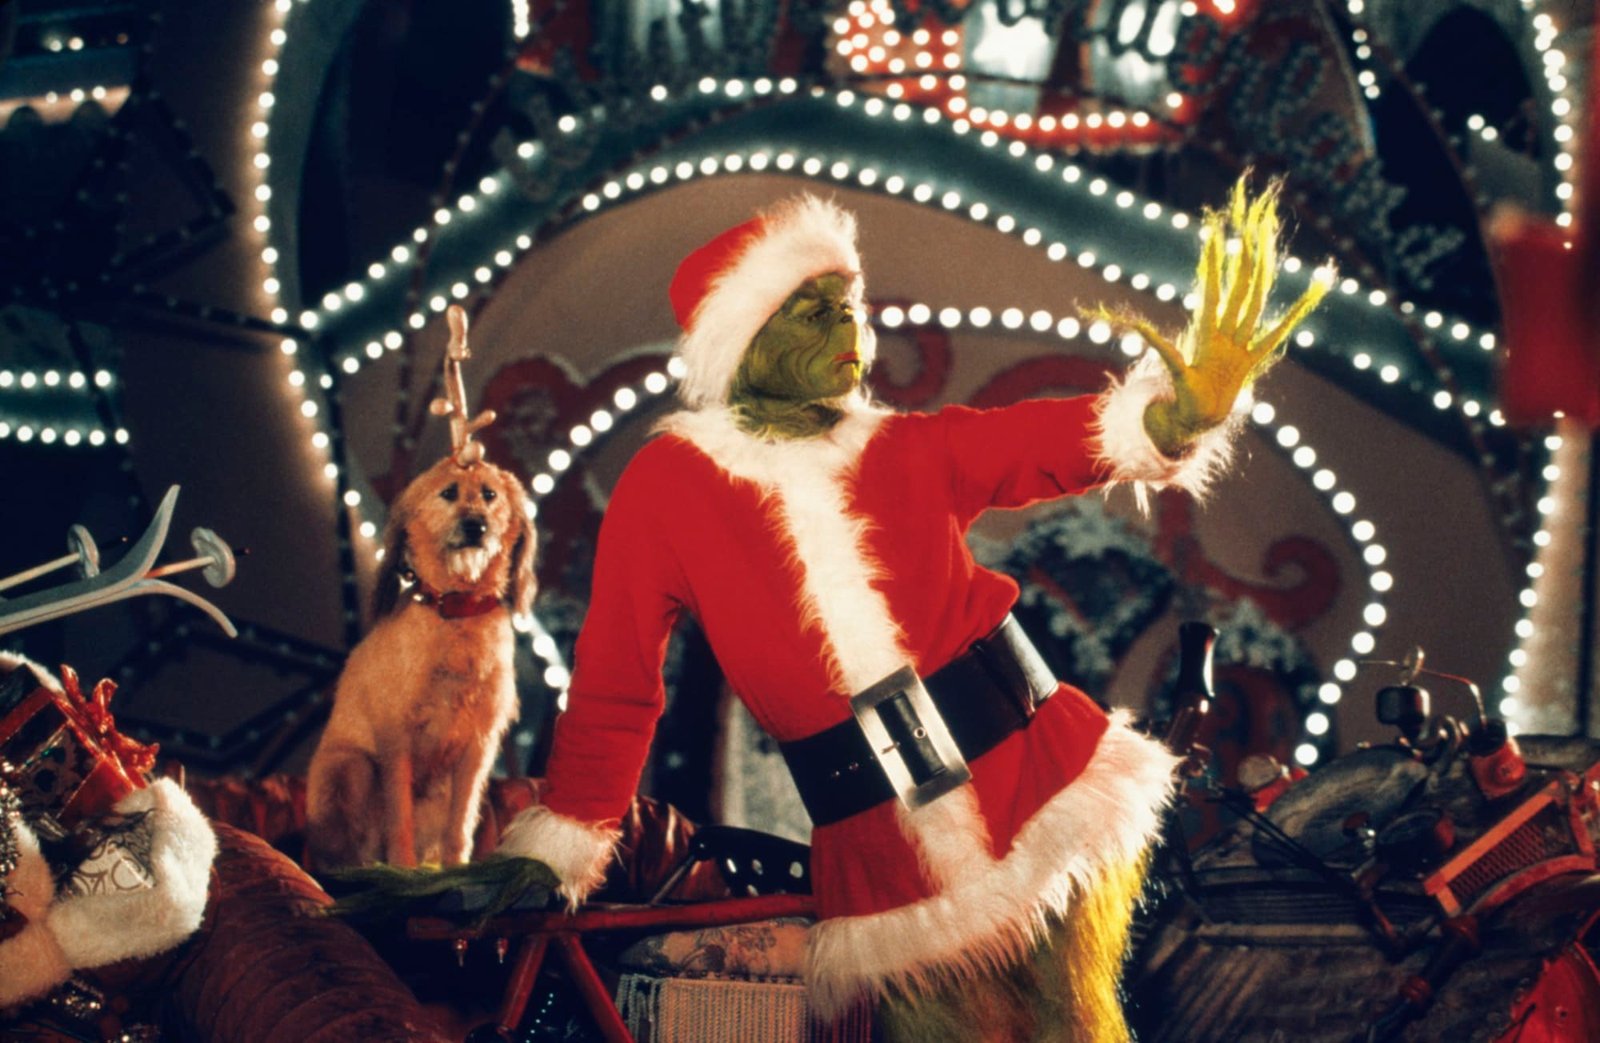  grinch stole christmas: Where to watch in the US